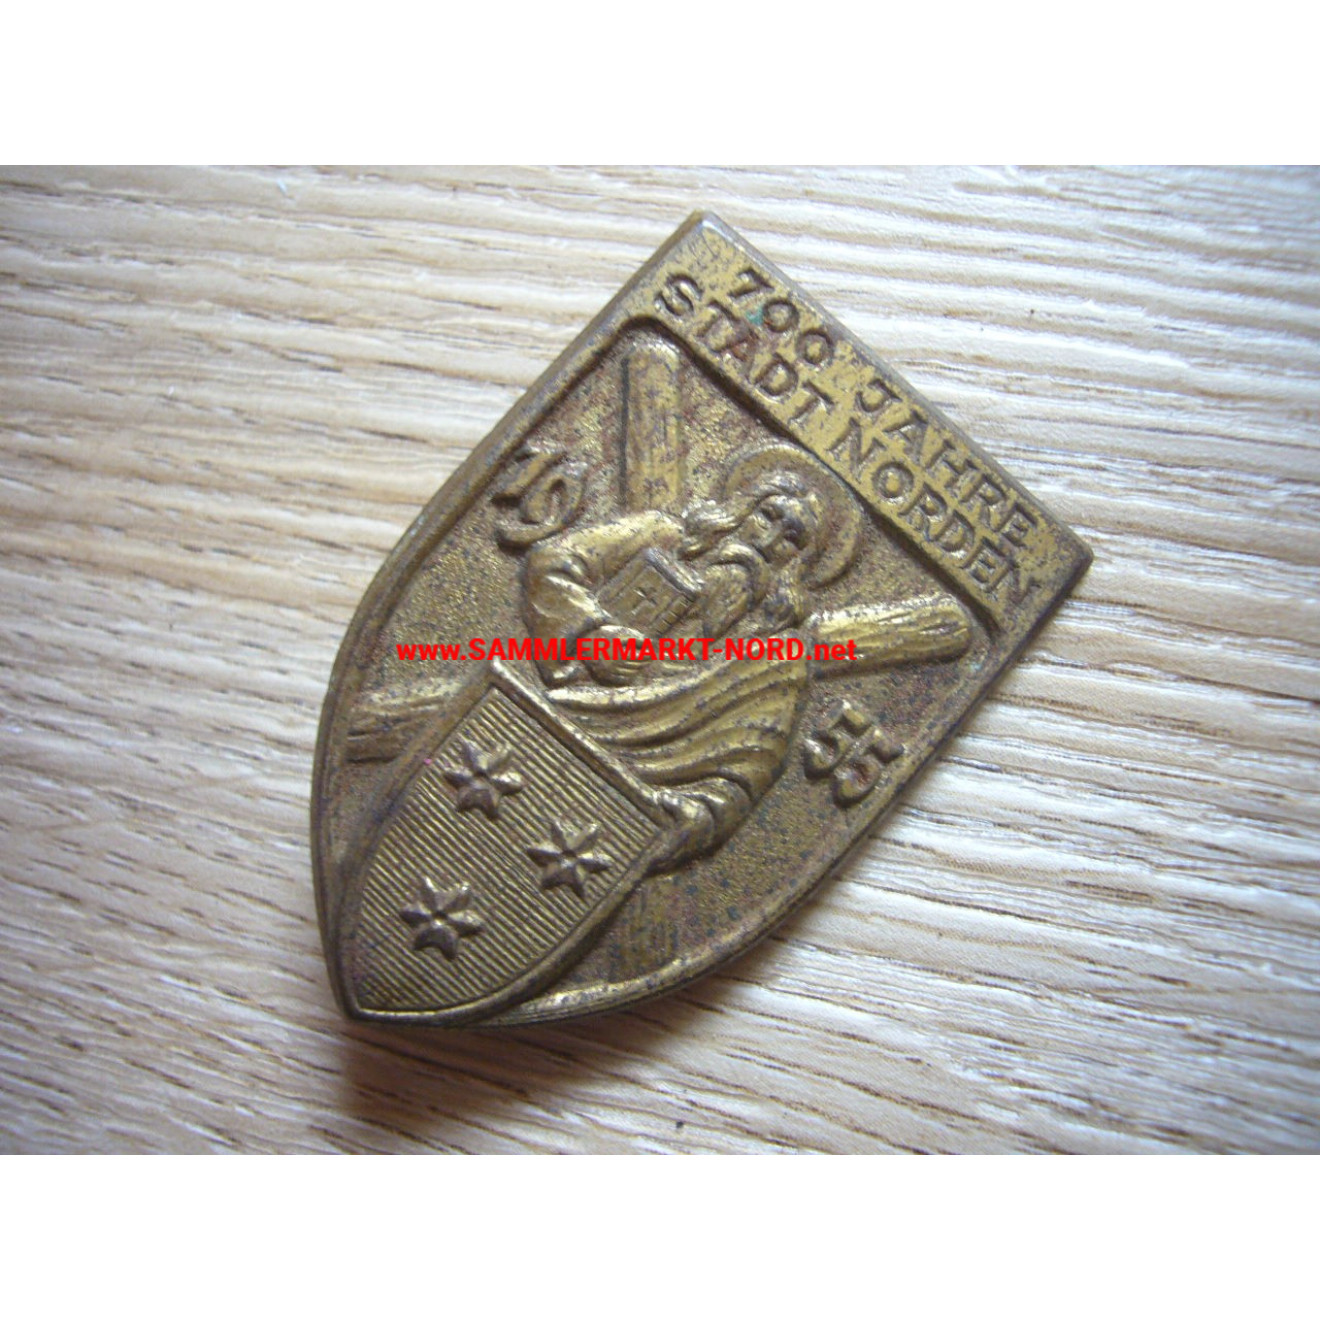 700 years of the town of Norden (East Frisia) 1955 - tin badge